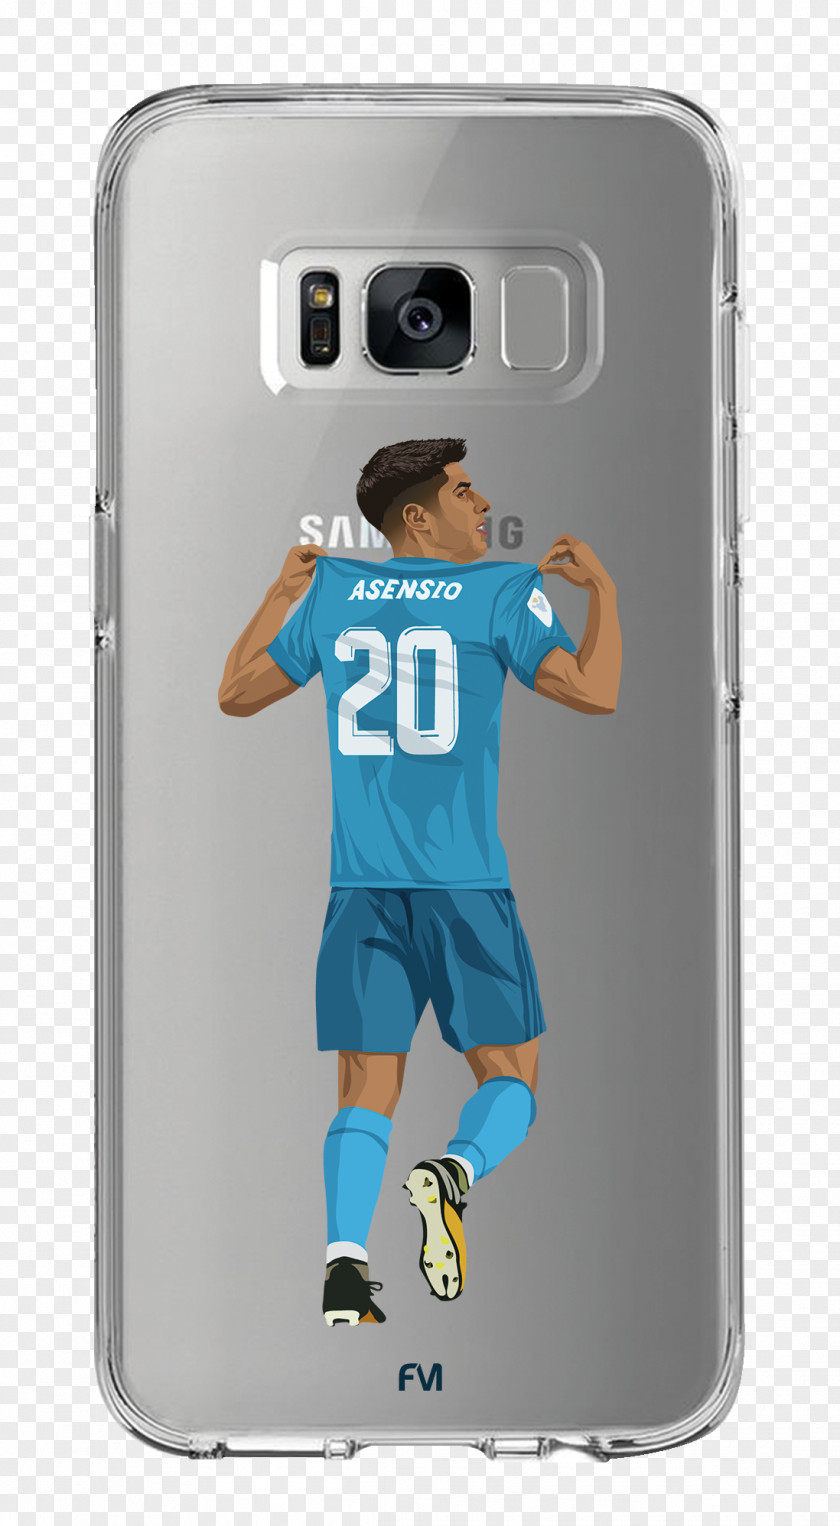 Asensio Samsung Galaxy S8 Mobile Phone Accessories Telephone S7 Dab PNG